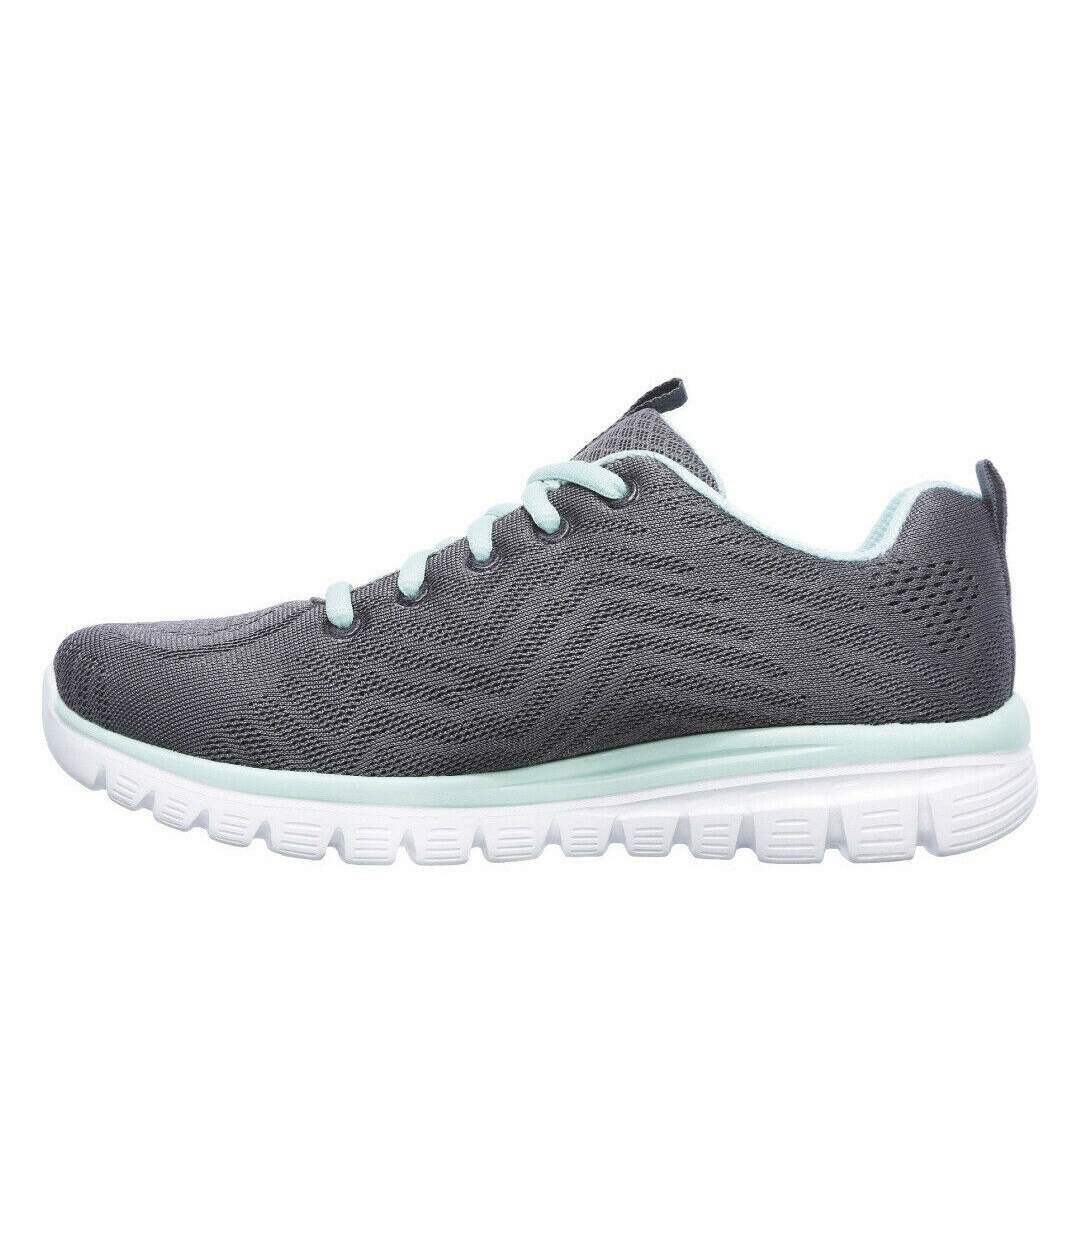 Skechers Womens/Ladies Graceful Get Connected Sports Trainer (Charcoal) - UTFS7076